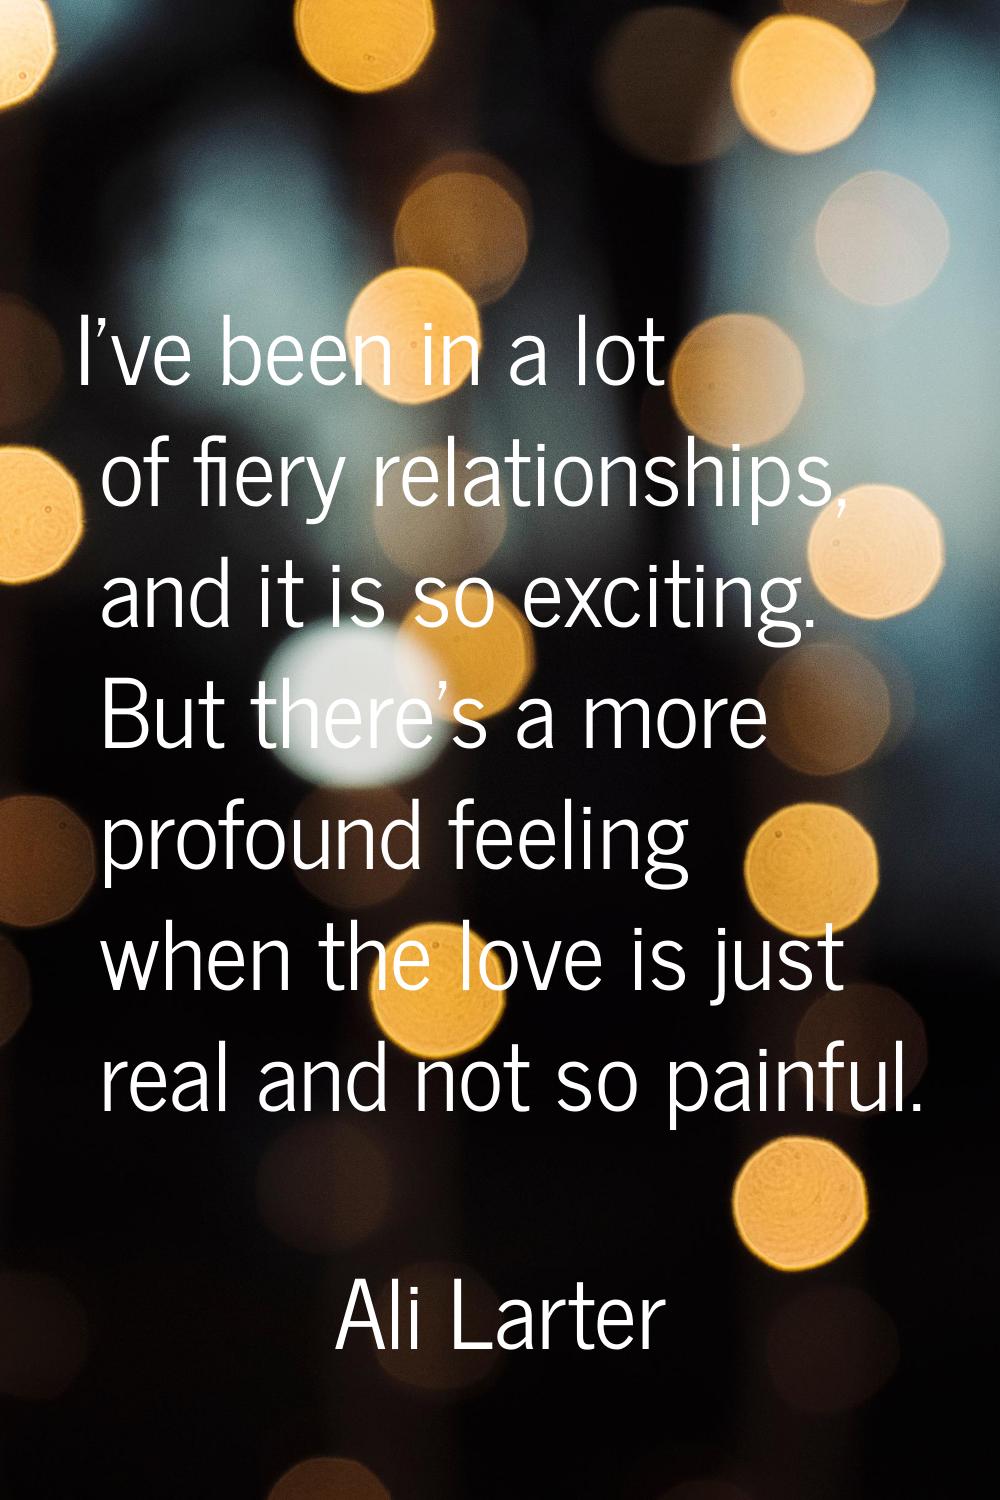 I've been in a lot of fiery relationships, and it is so exciting. But there's a more profound feeli